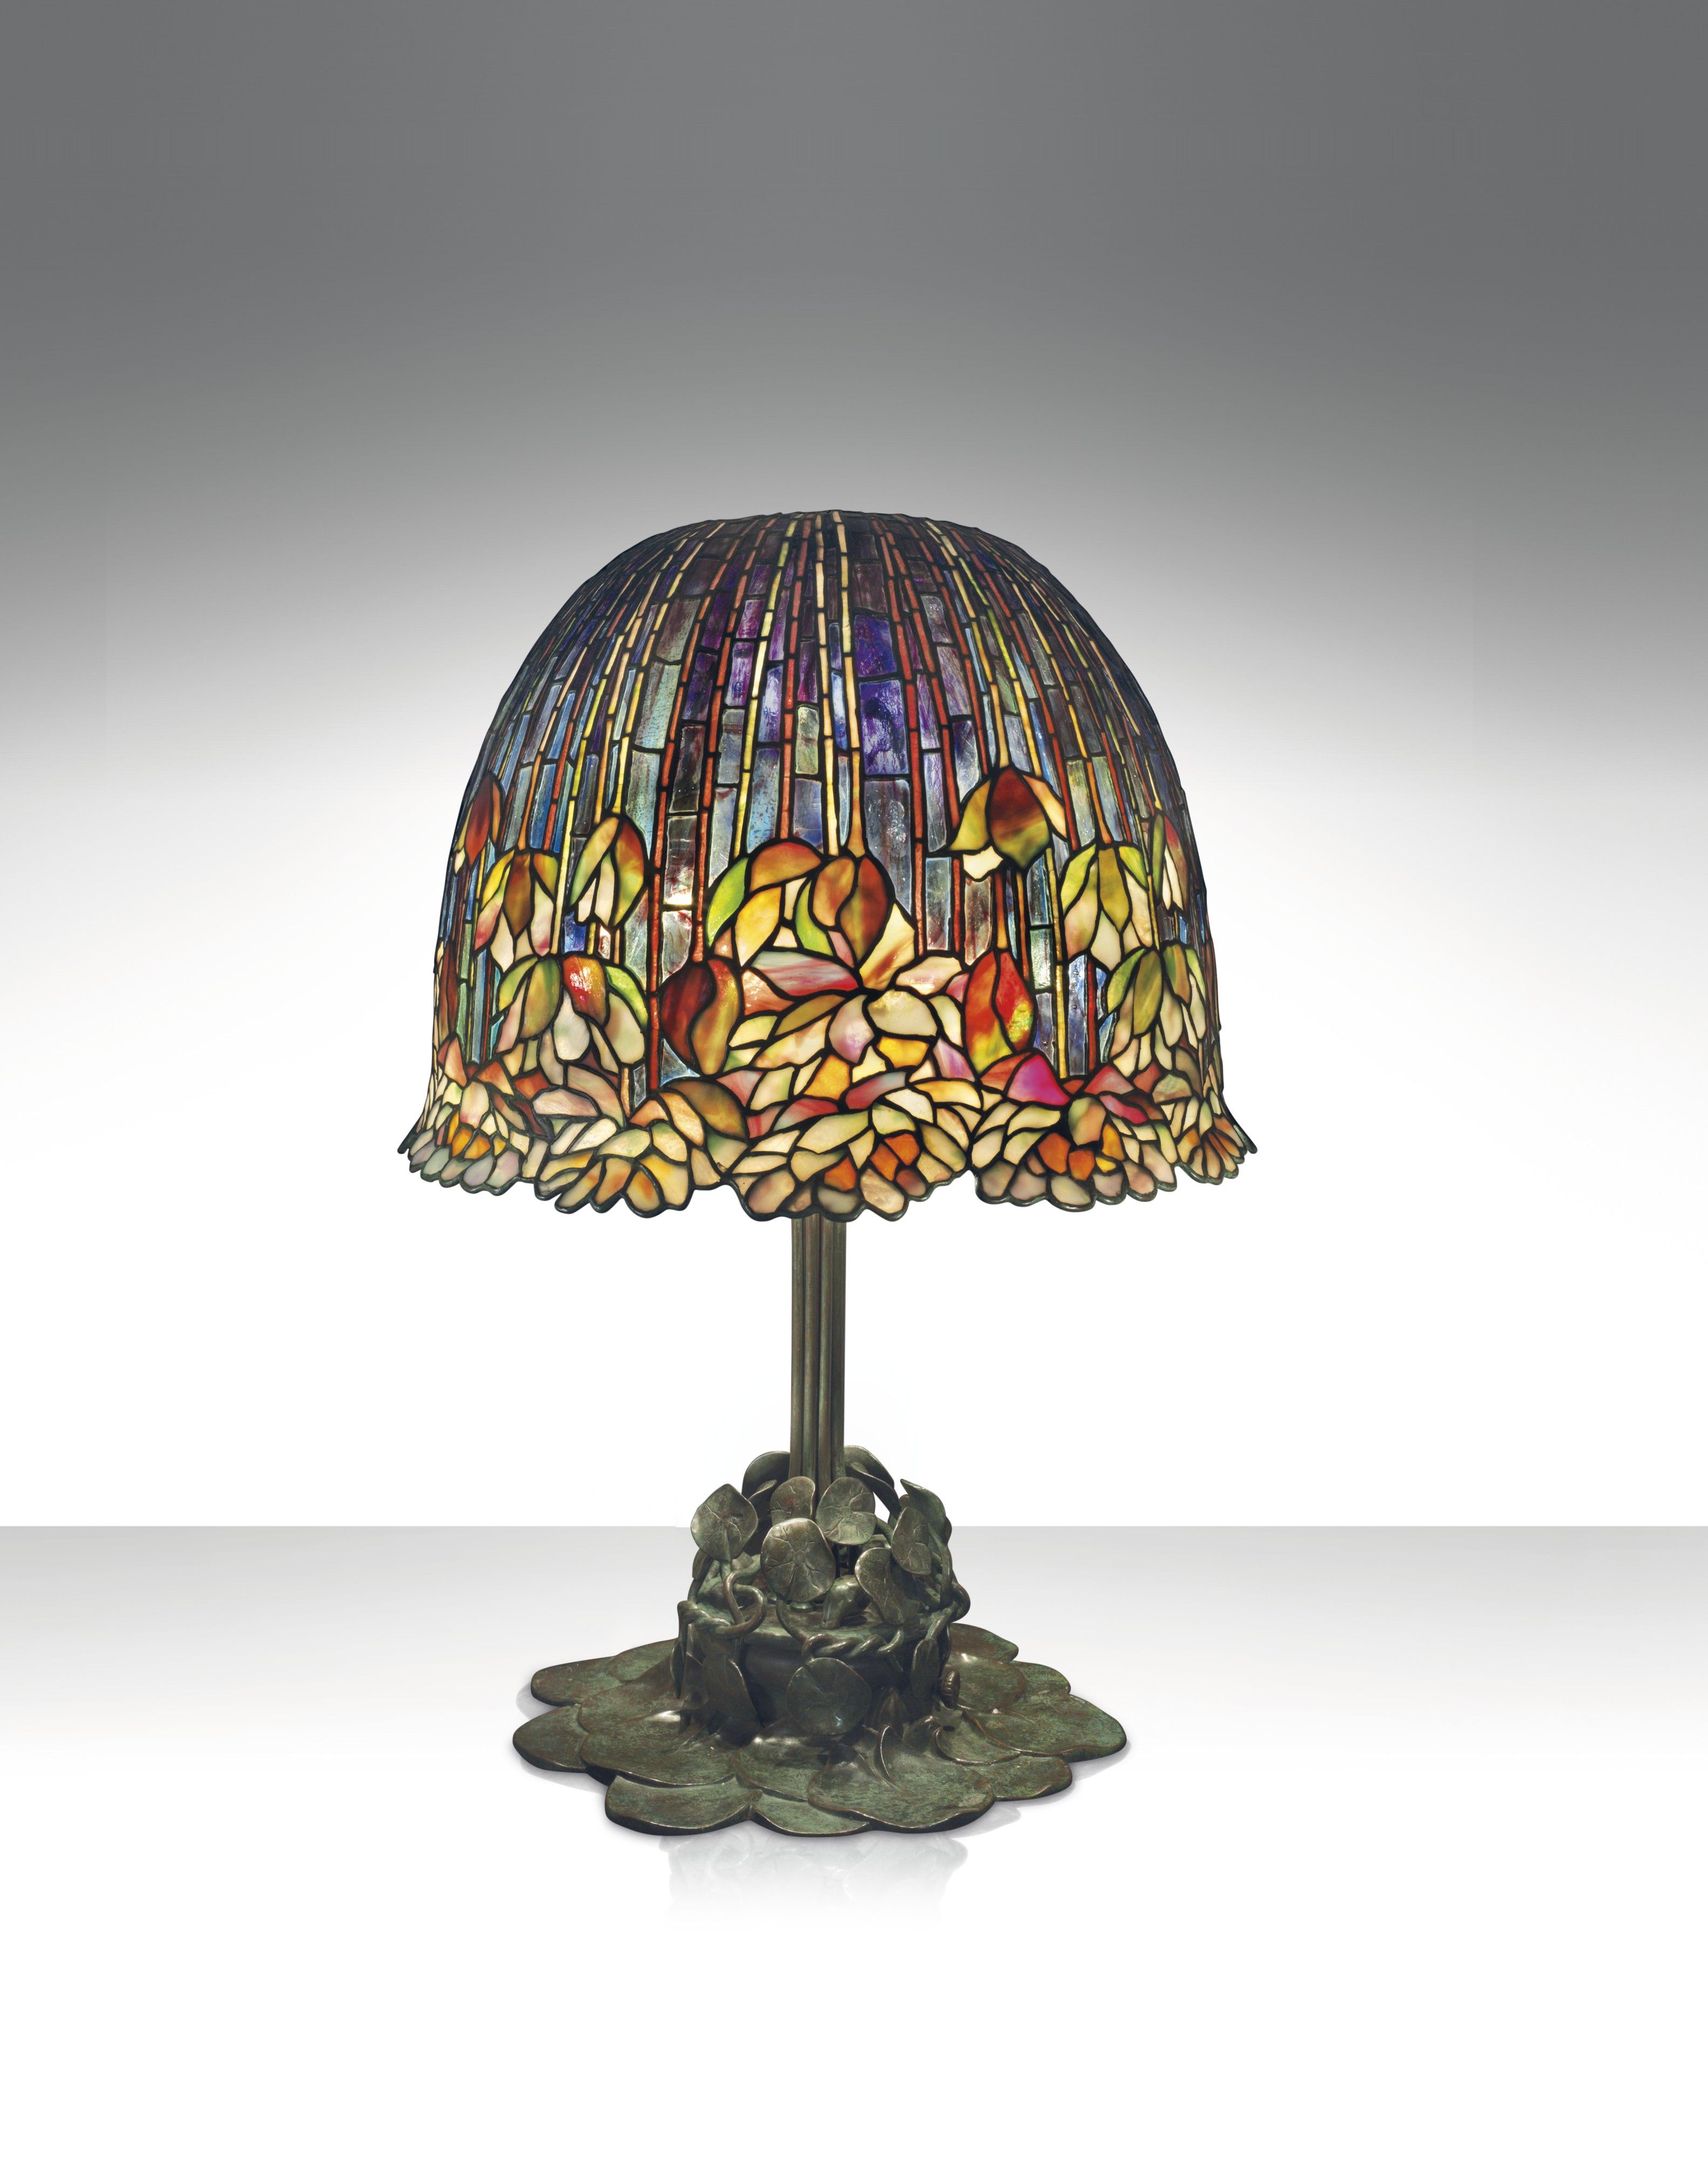 Christie's Sold A Tiffany For $3.37 Million Pond Lily Tiffany Lamp